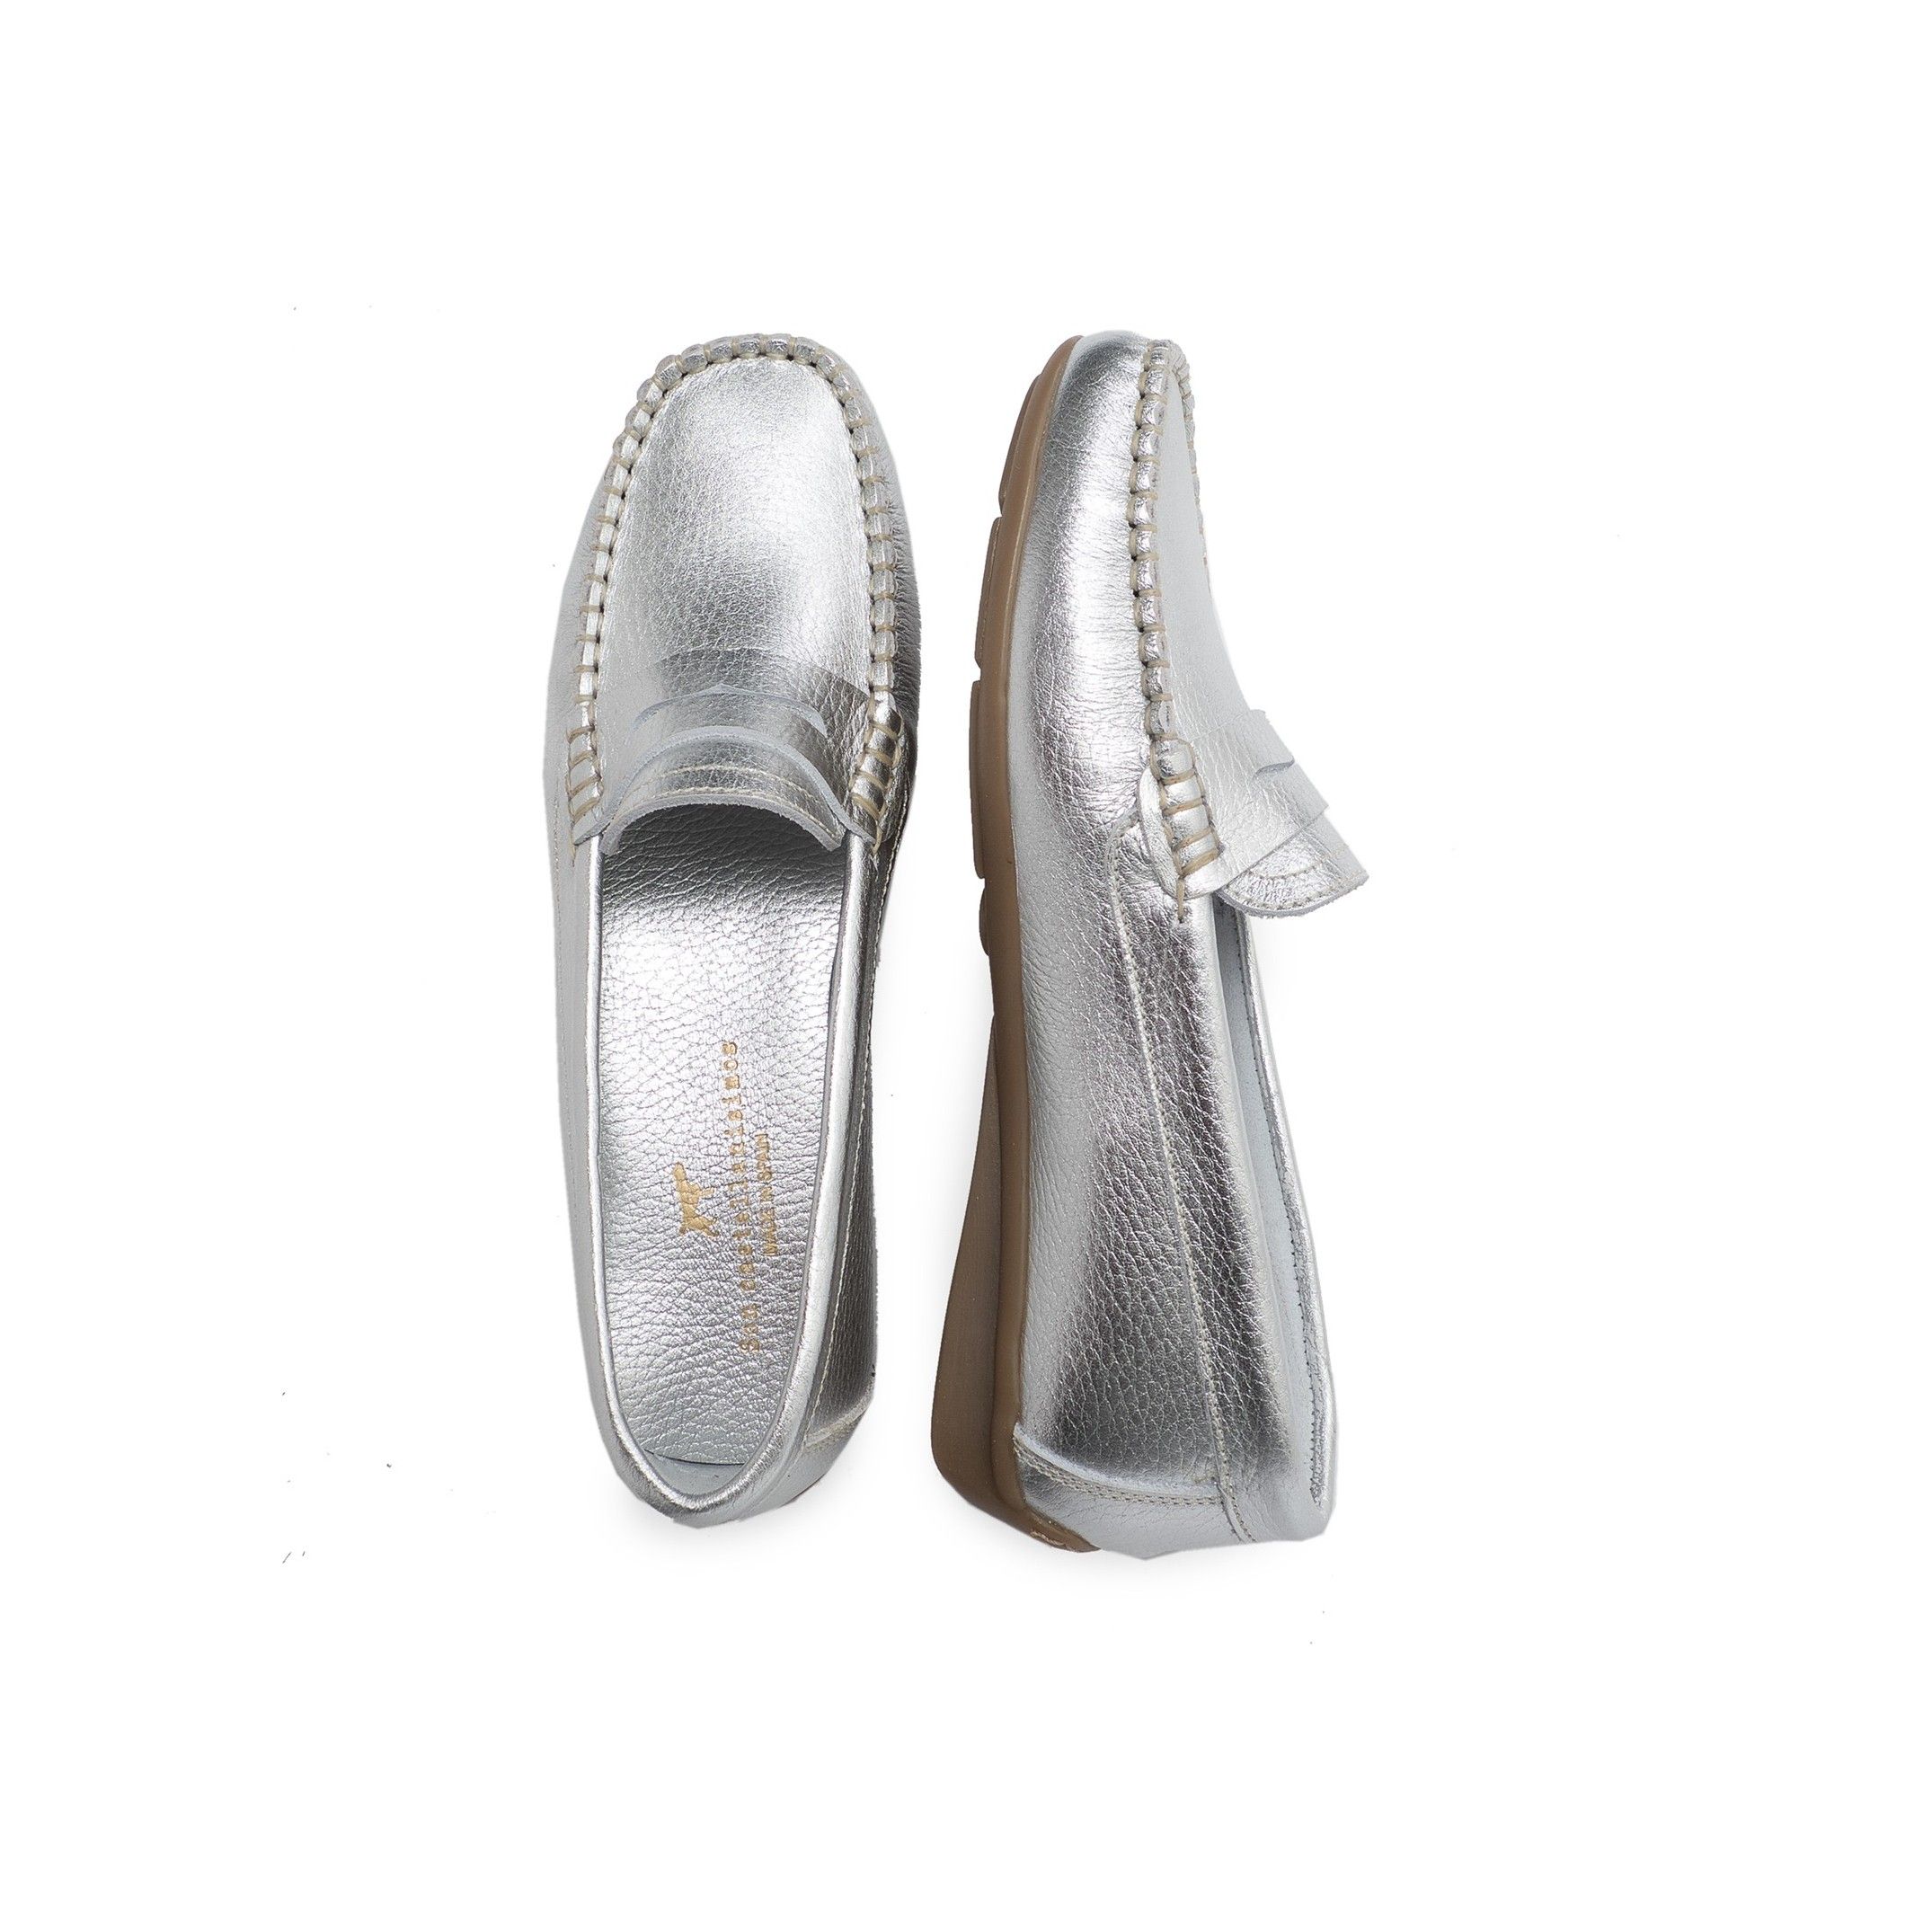 Nappa leather loafers for women, by Son Castellanisimos. Upper made of cowhide leather. Open shoe. Inner lining and insole made of cowhide leather. Sole material: synthetic and non slip. Heel height: 2 cm. Designed and made in Spain.